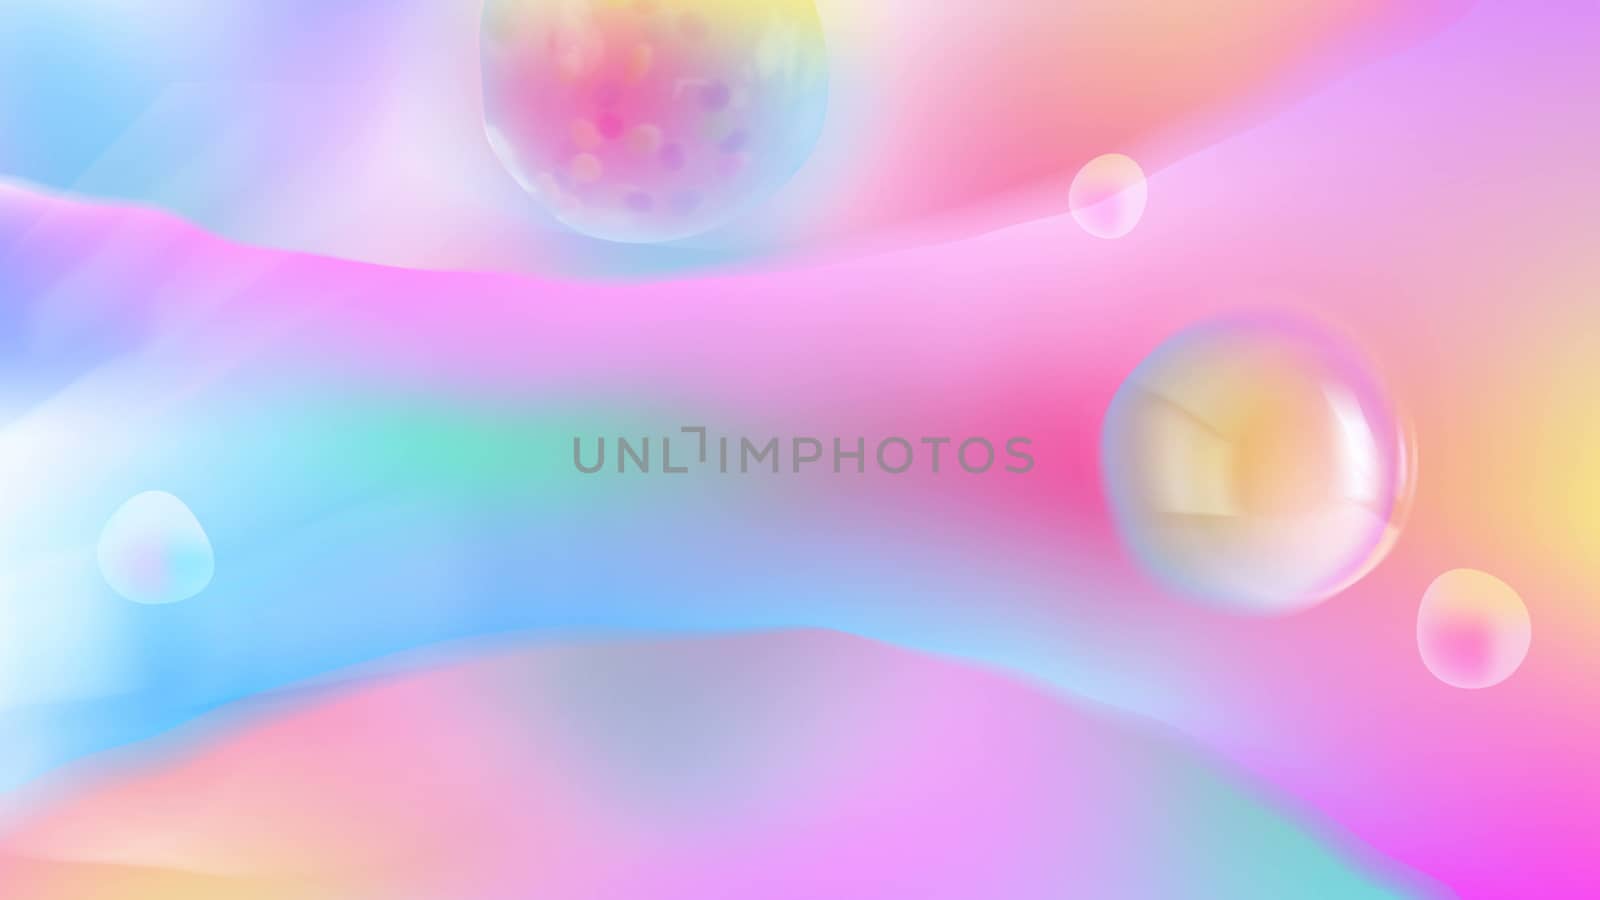 Gentle abstraction with beautiful light balls in the air, romantic or spring background, 3d rendering backdrop